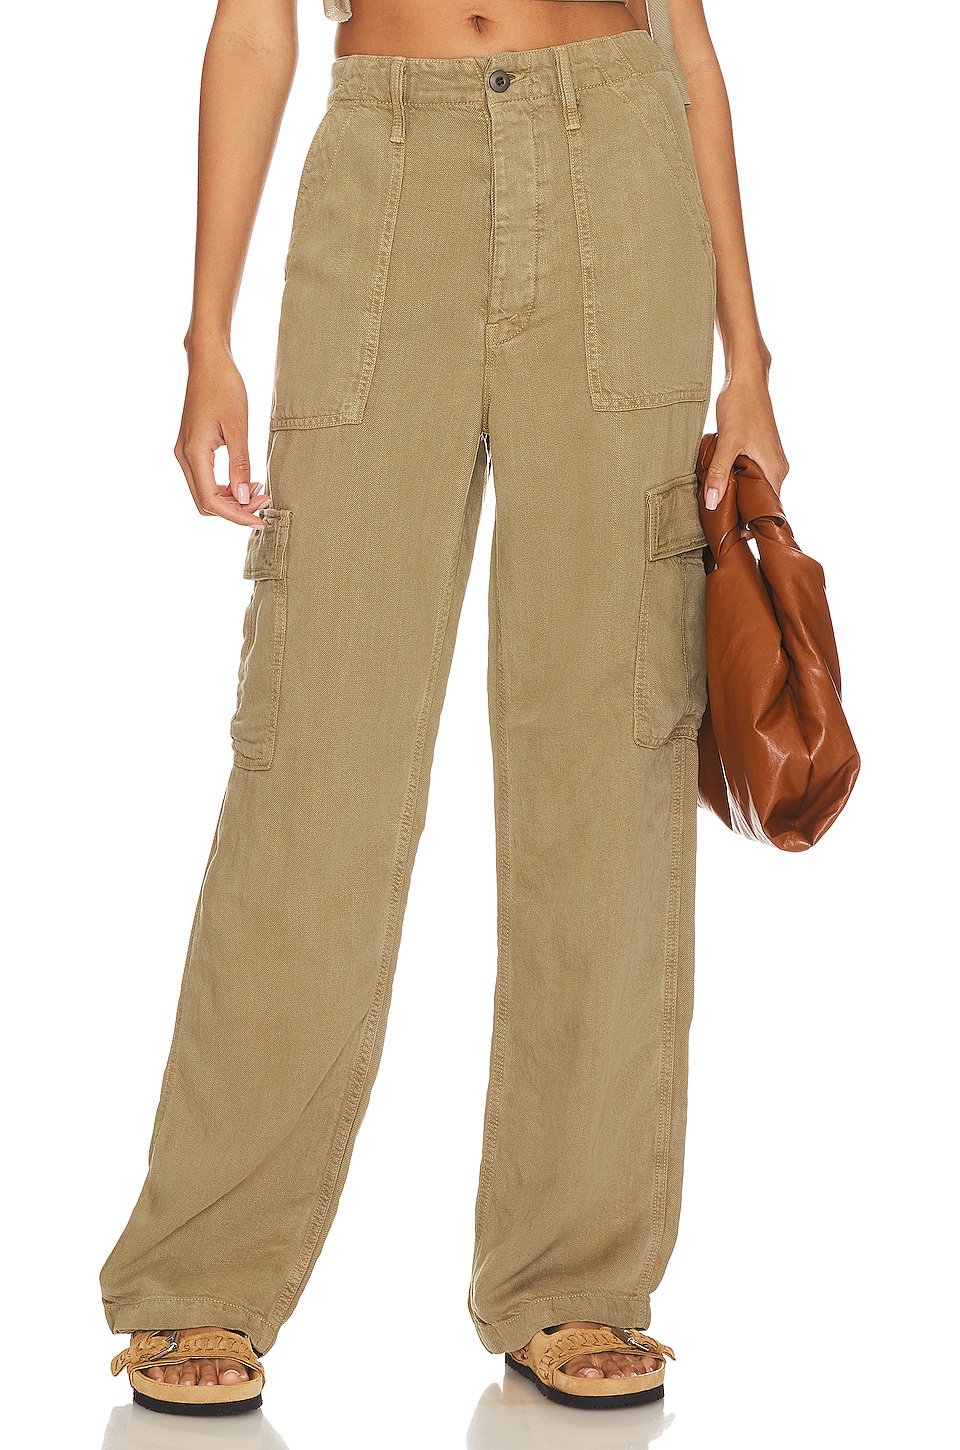 OFF-WHITE Toybox Dry Multi Pocket Pant in Sand